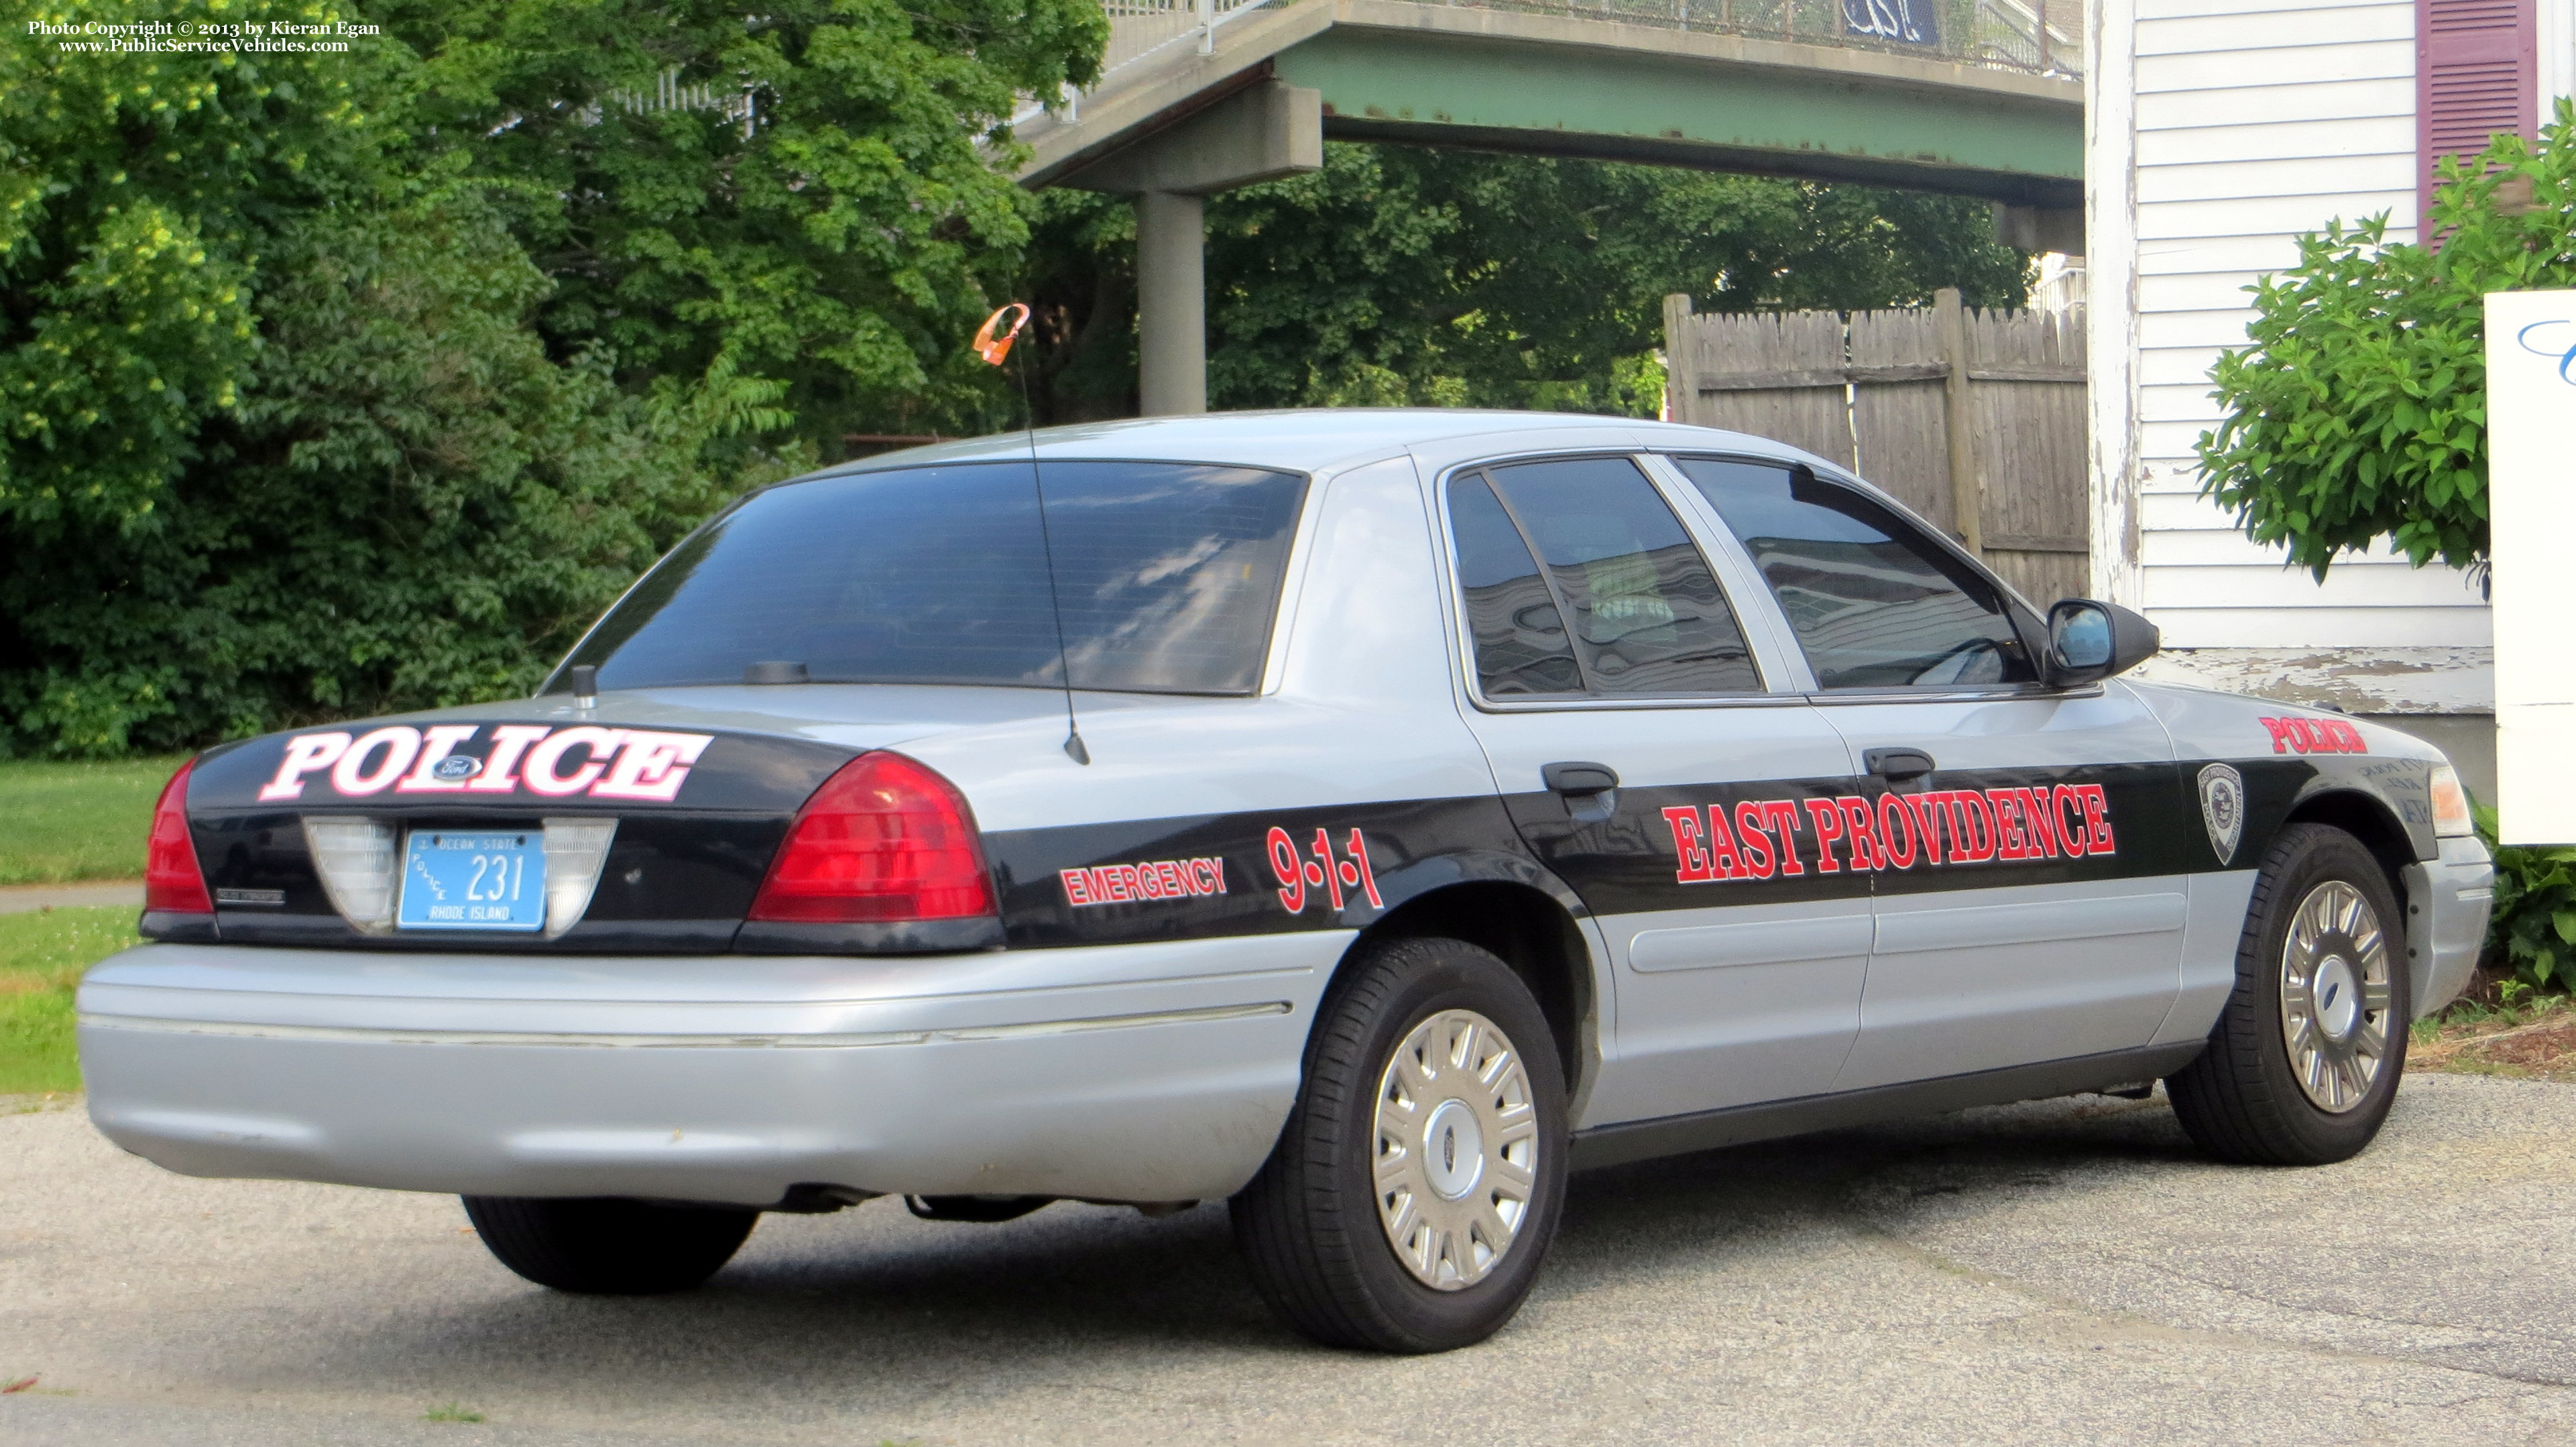 A photo  of East Providence Police
            Community Relations Unit, a 2003-2005 Ford Crown Victoria Police Interceptor             taken by Kieran Egan